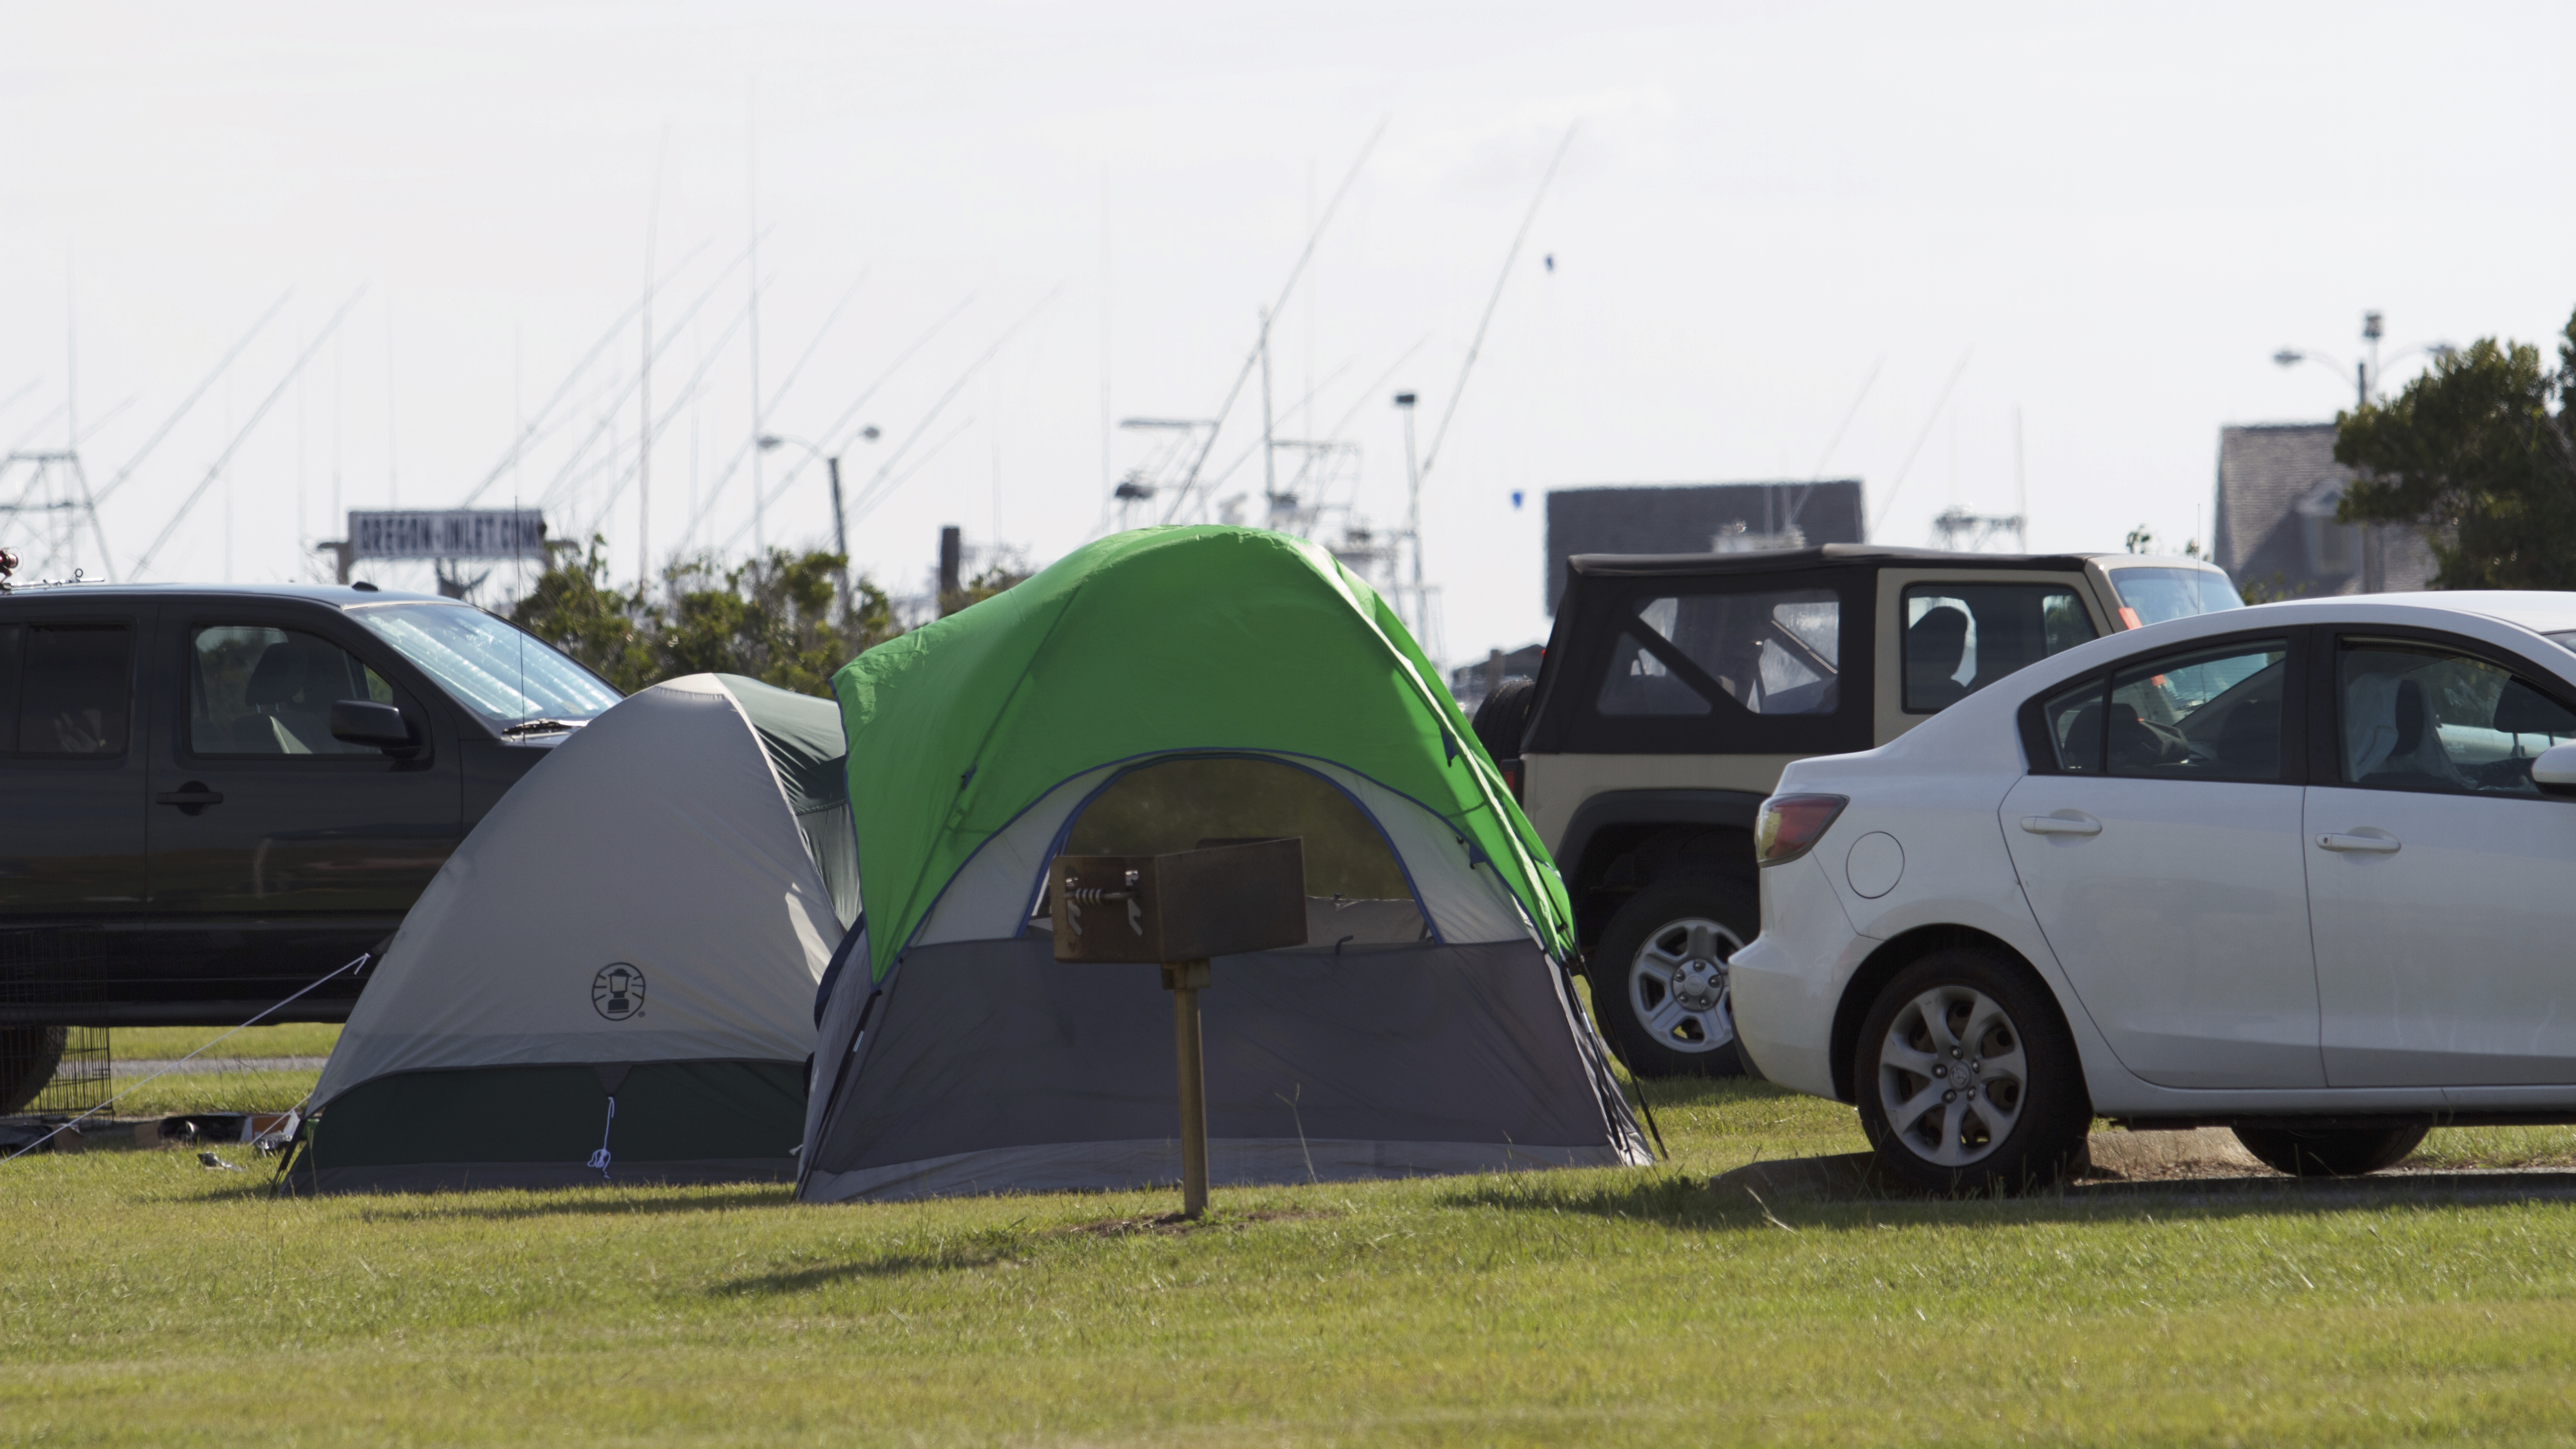 Campgrounds - Cape Hatteras National Seashore (U.S. National Park Service)